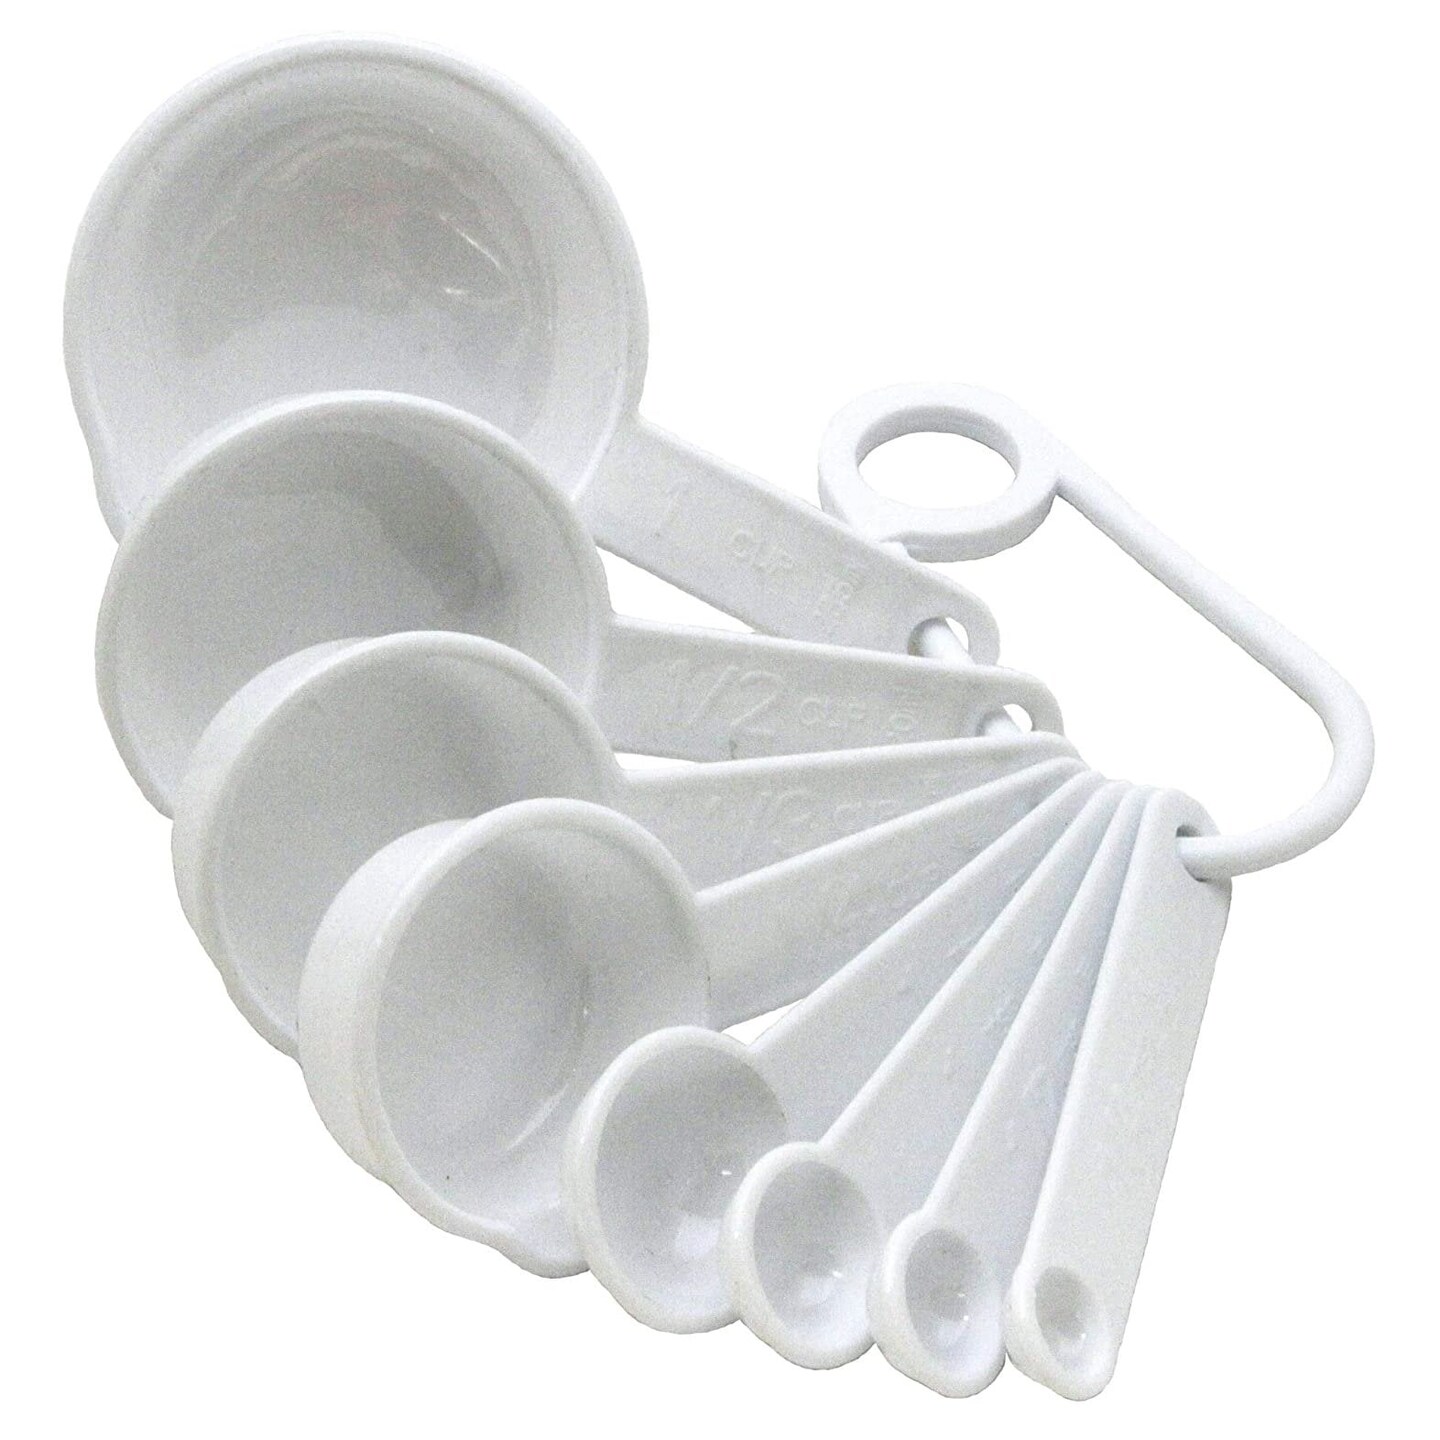 Set of 8 Measuring Cups and Measuring Spoons, Plastic Nesting